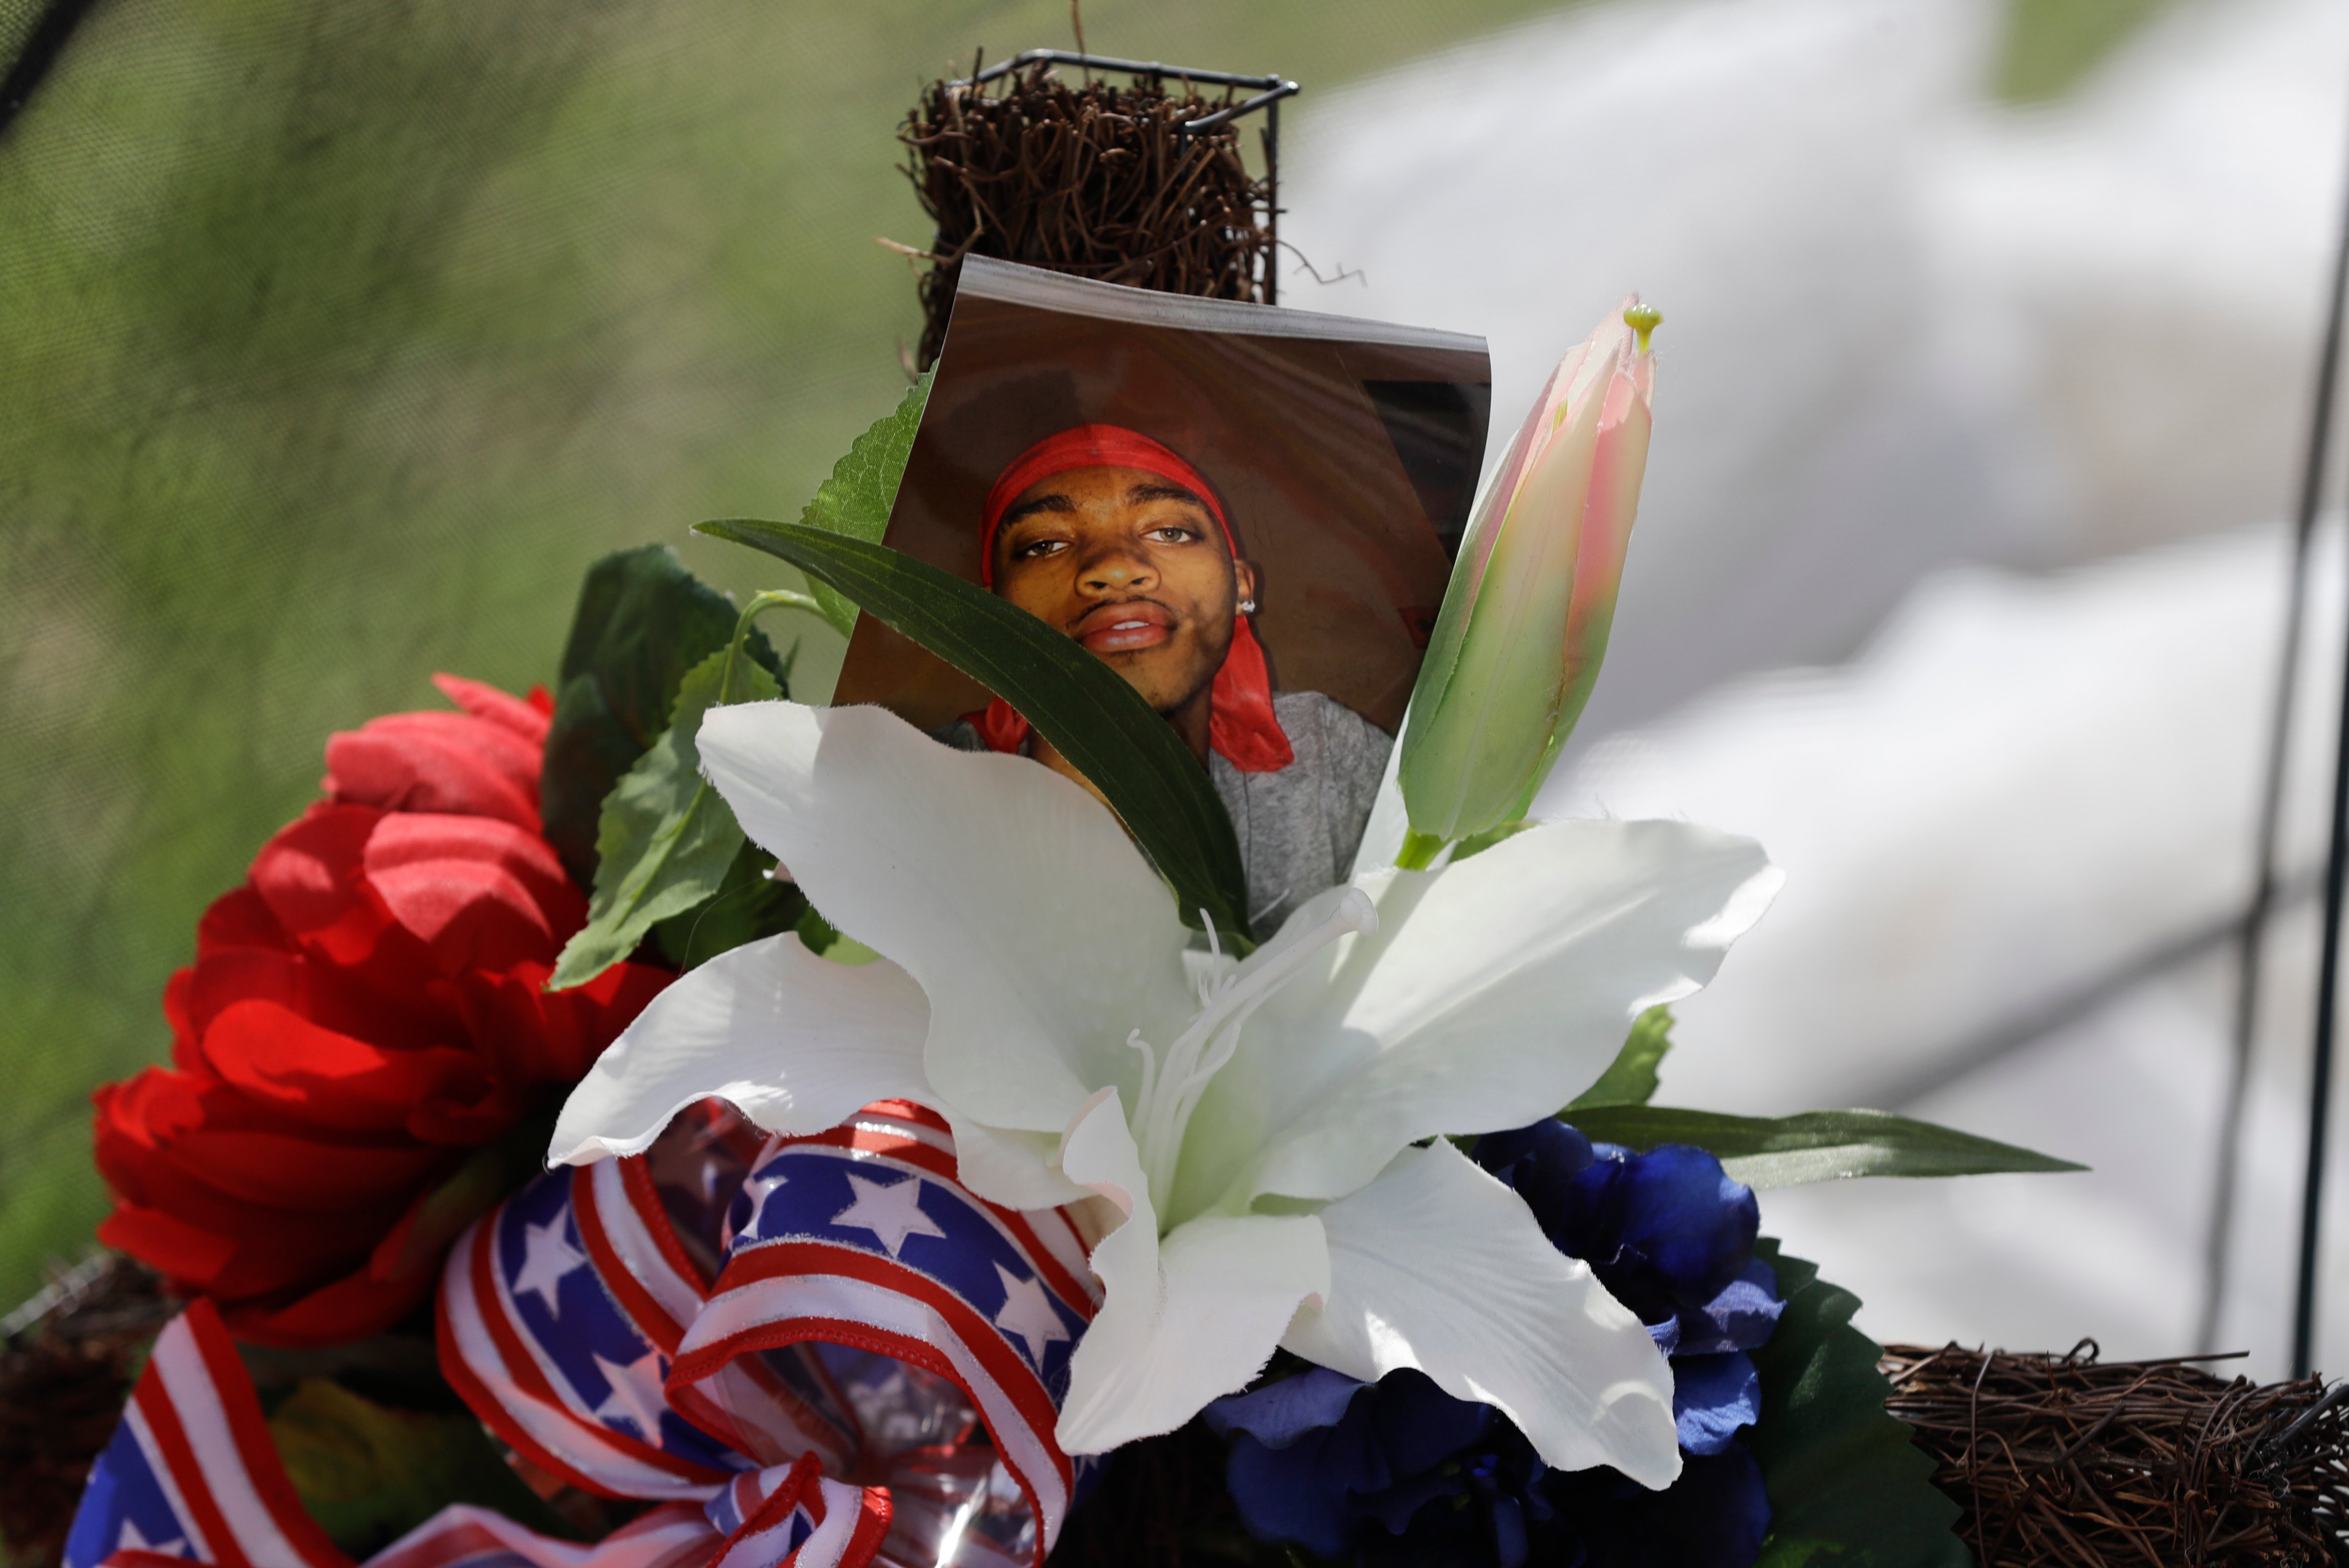 A photo of Dreasjon "Sean" Reed is placed in a memorial before a news conference on June 3, 2020, in Indianapolis. (Darron Cummings - The Associated Press)